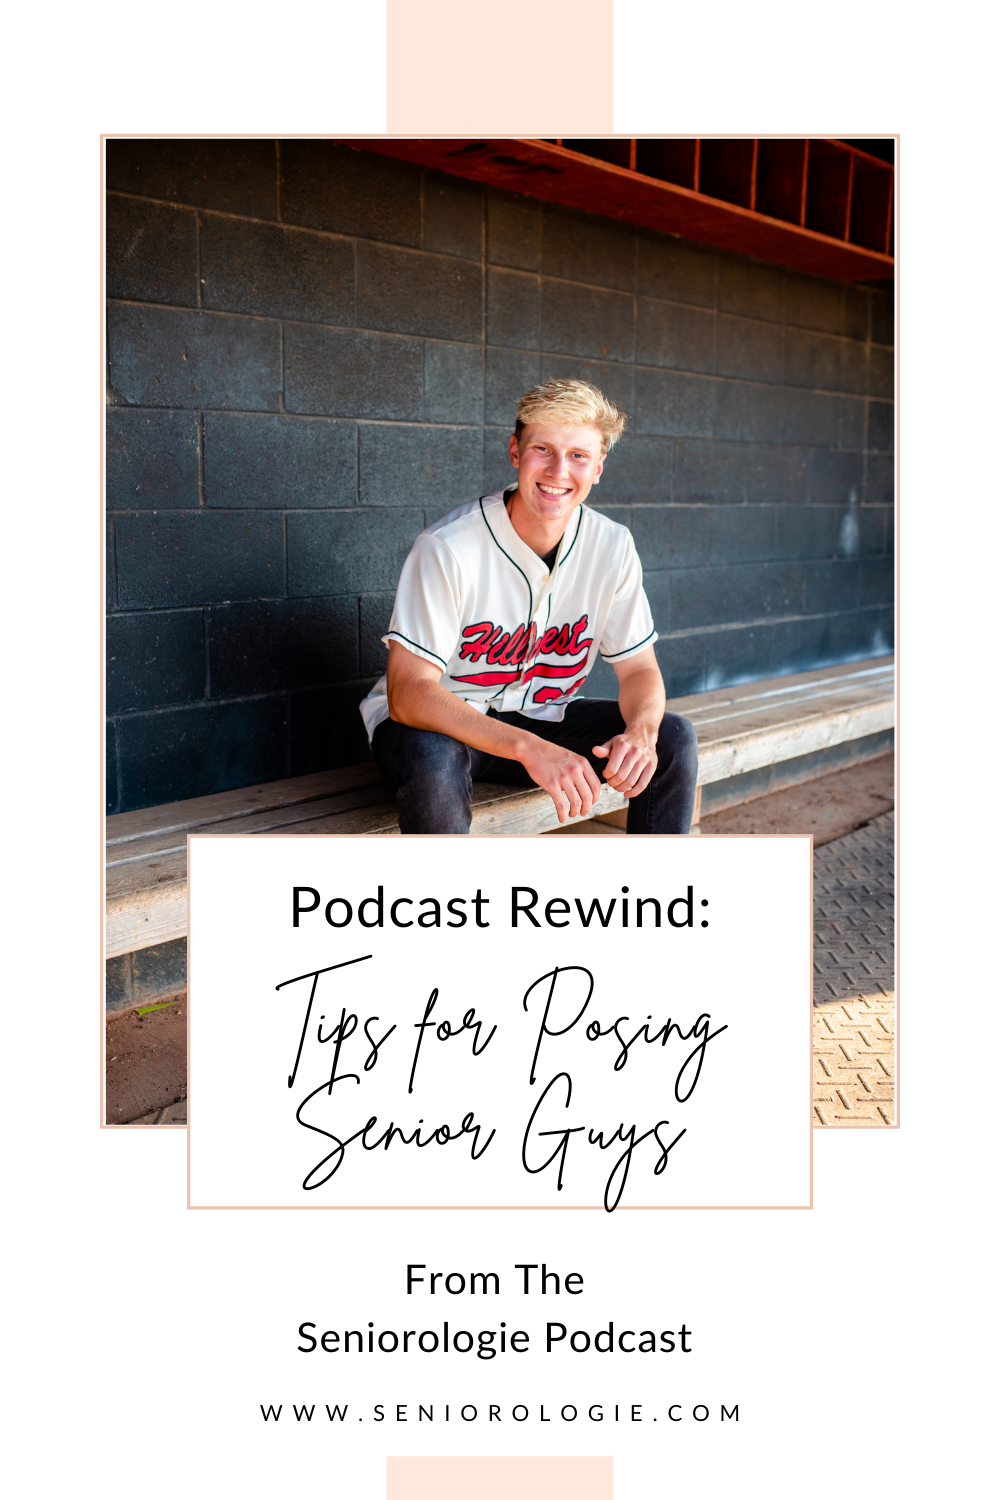 Tips for Posing Senior Guys: podcast rewind featuring tips for posing senior guys on the Seniorologie Podcast by Leslie Kerrigan